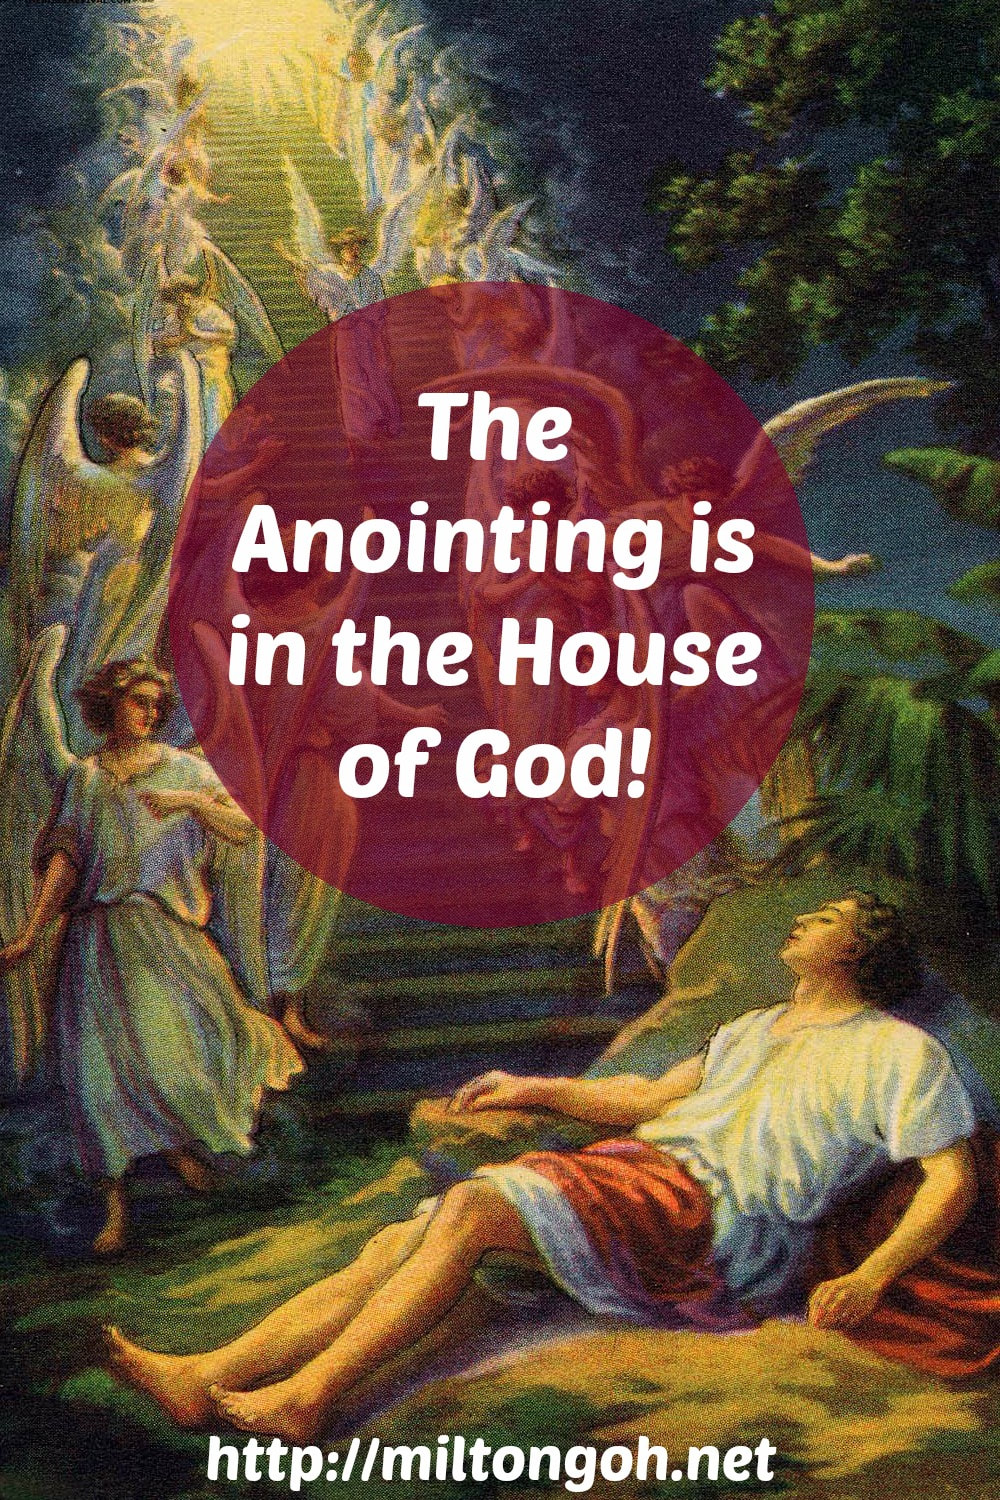 Pinterest Pinnable Image. Repin to share with your family and friends about the important of gathering at the House of God where the anointing of God is imparted to the church. 